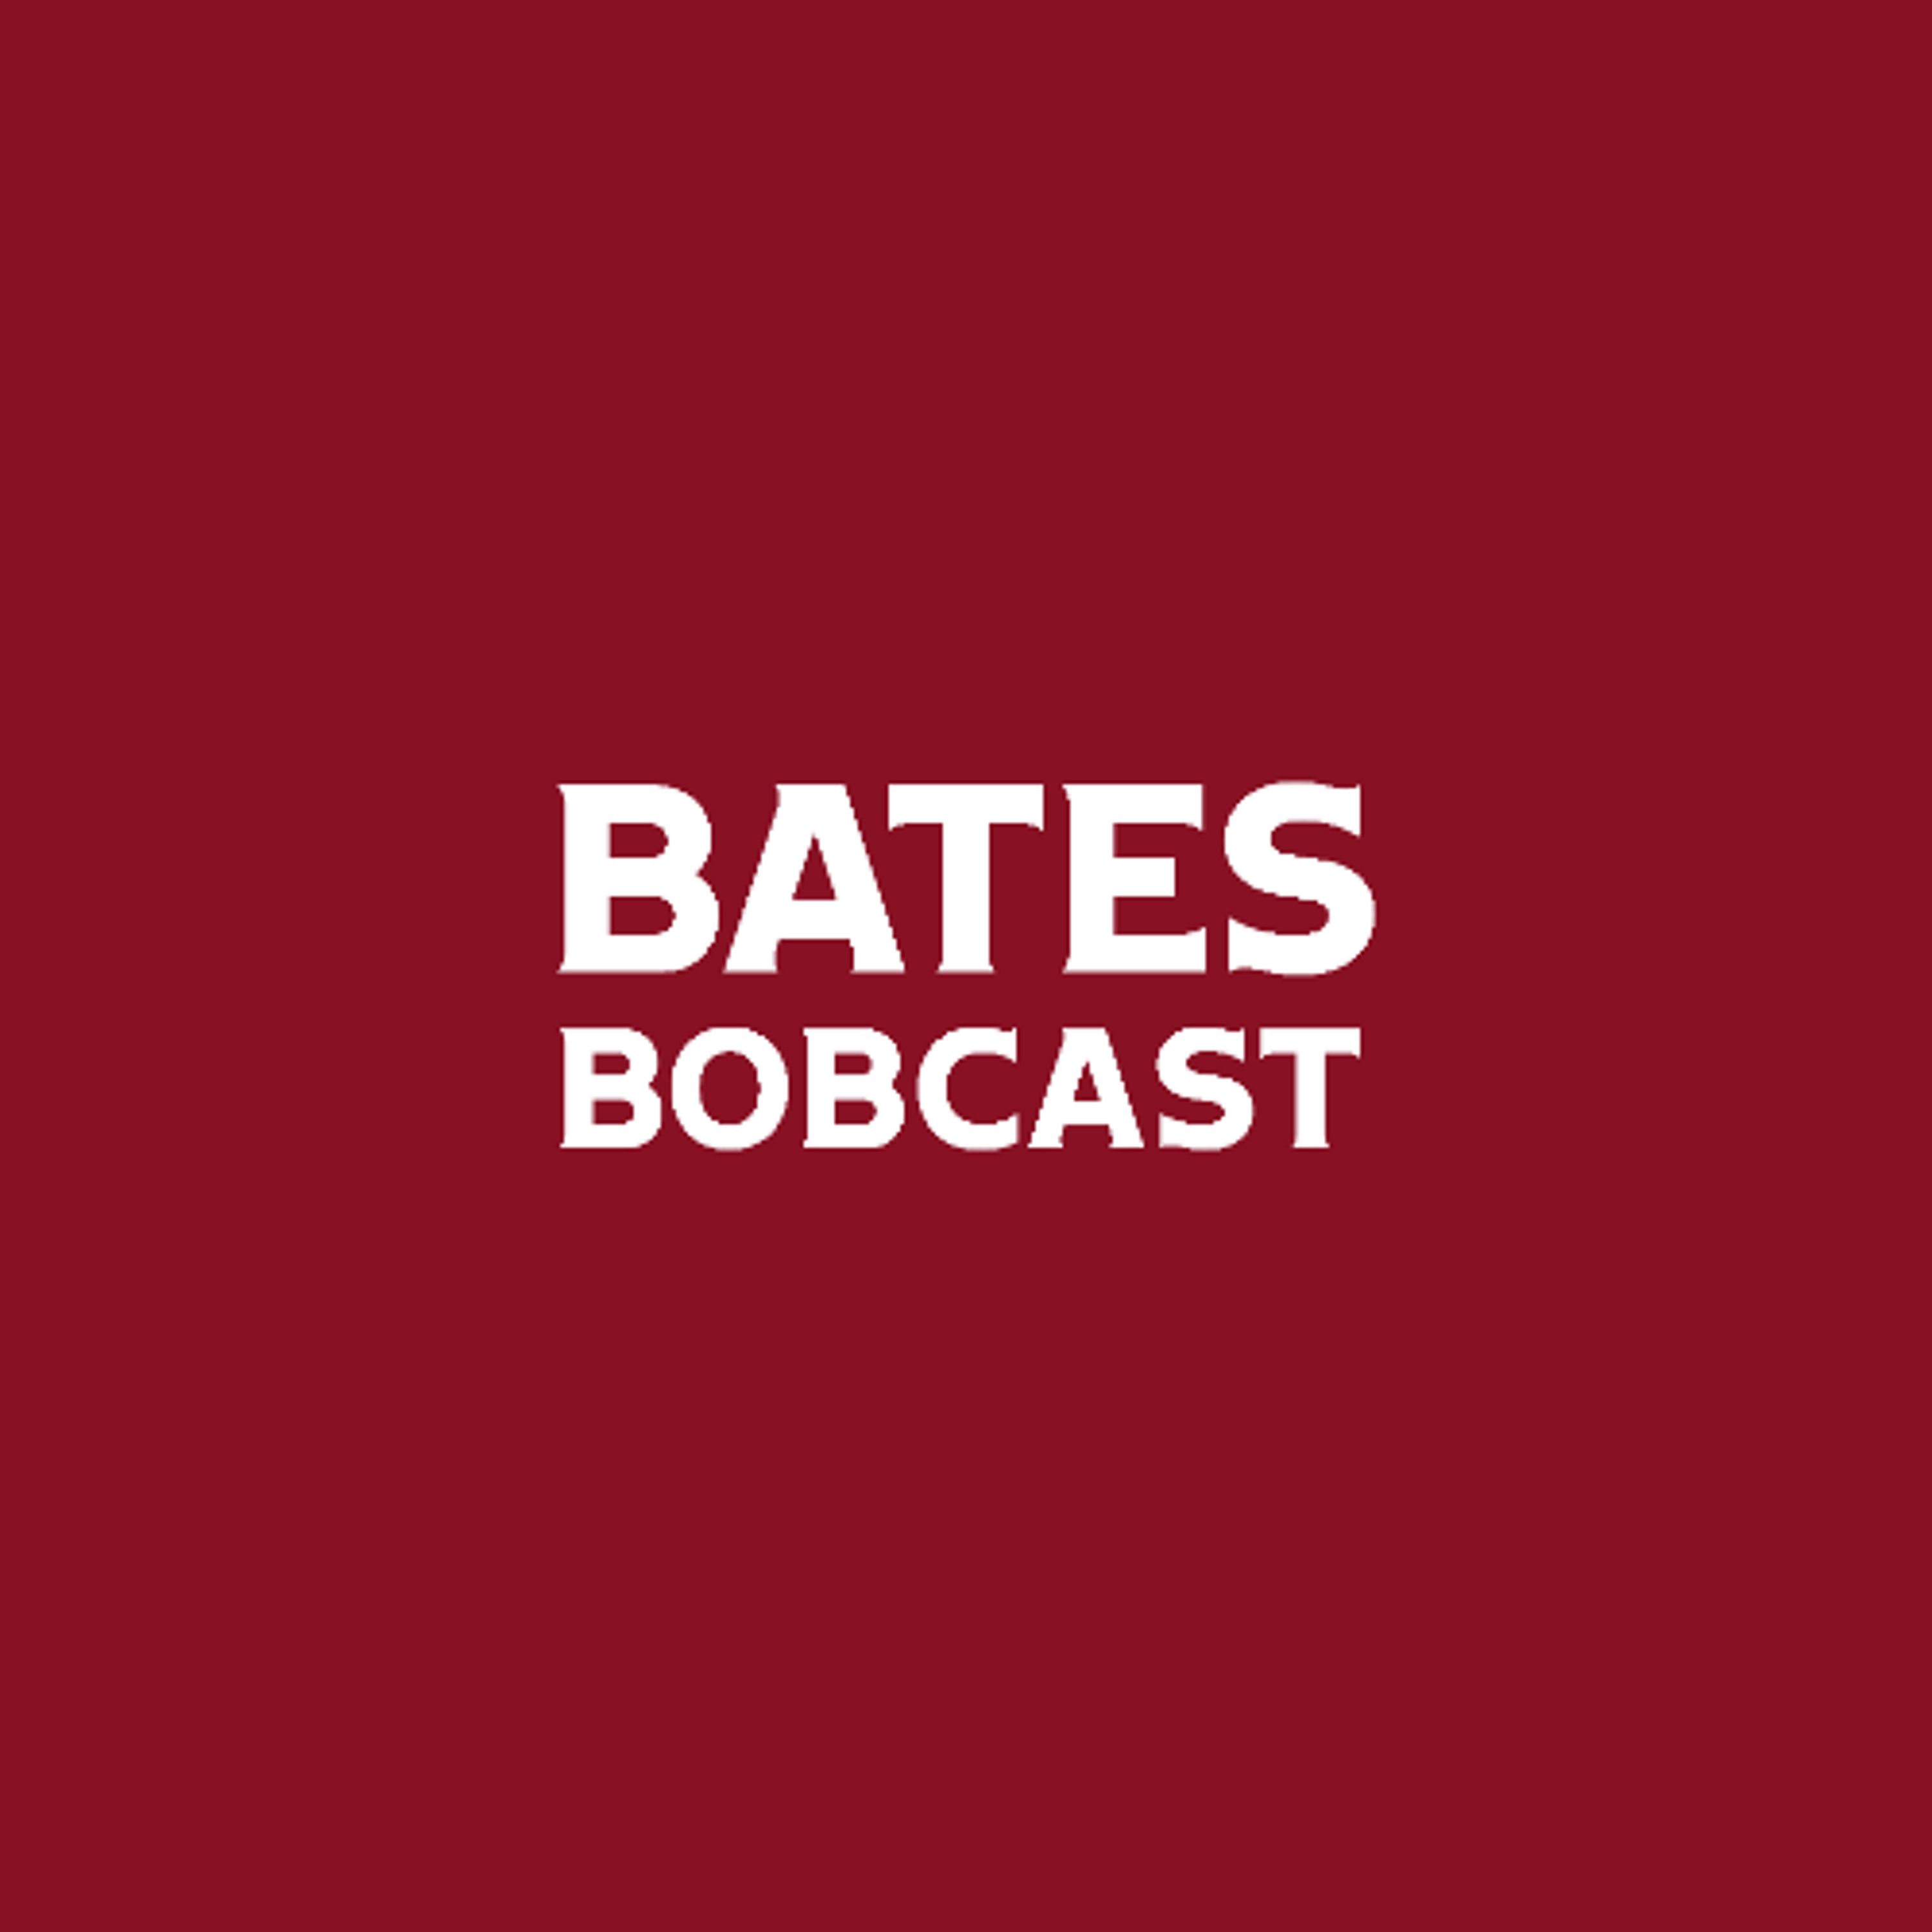 Bates Bobcast Episode 332: The Sweetness of March for Bates sports